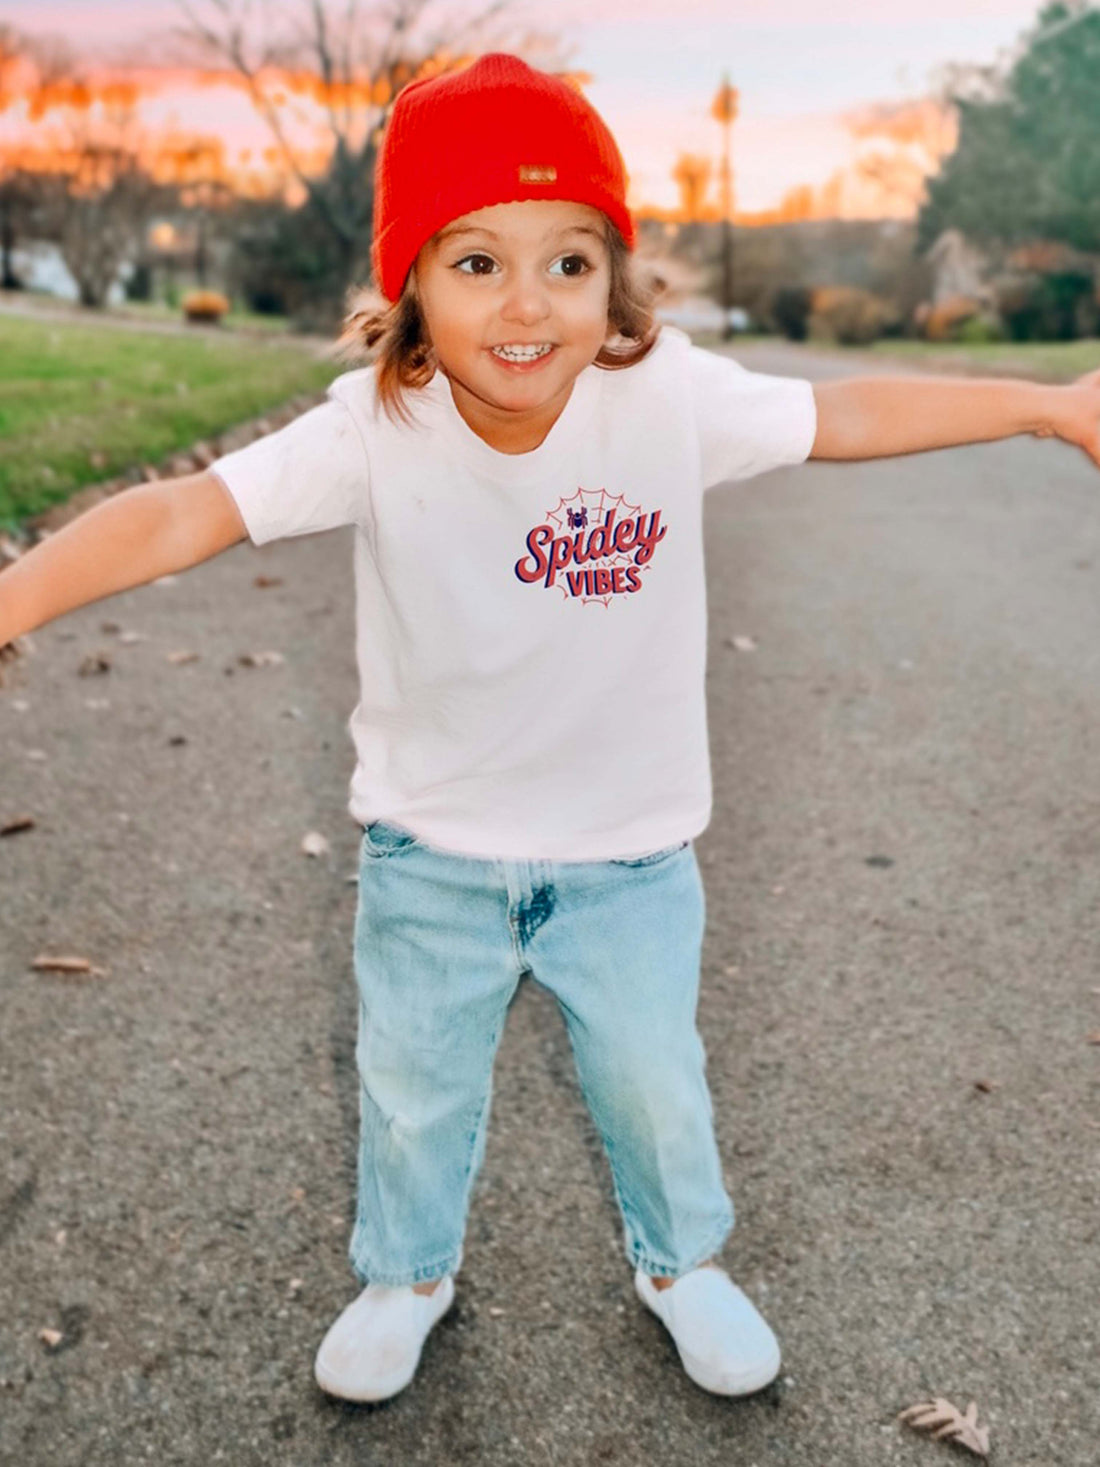 Toddler Spidey Vibes Tee - White (front logo only)